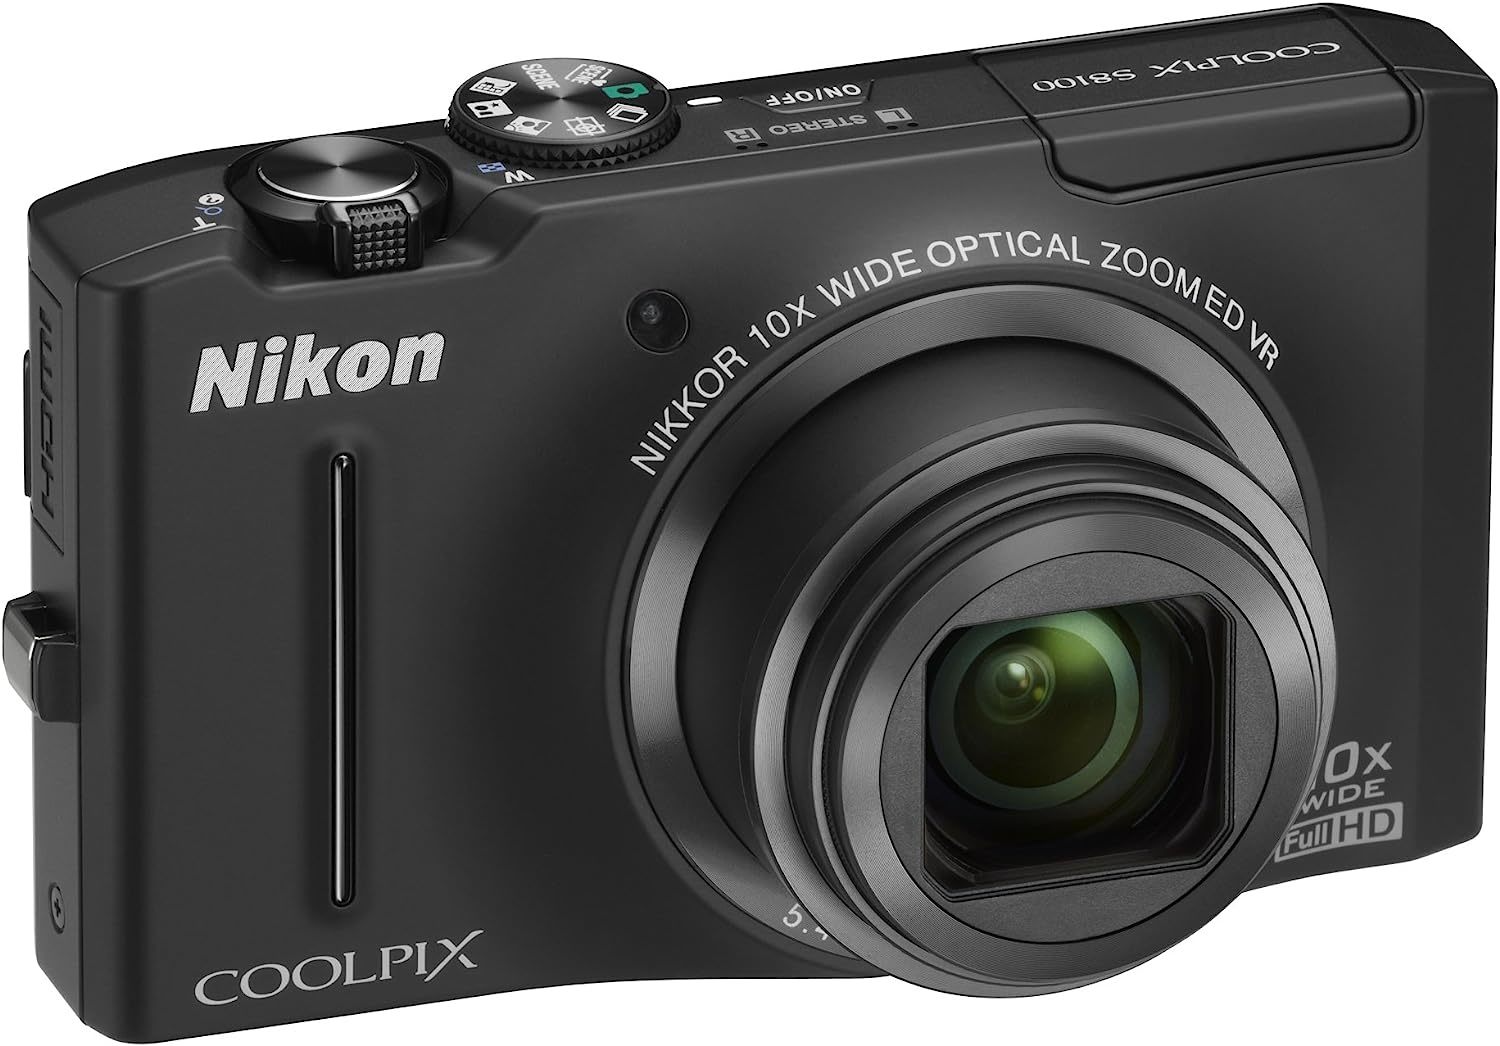  Nikon COOLPIX P510 16.1 MP CMOS Digital Camera with 42x Zoom  NIKKOR ED Glass Lens and GPS Record Location (Red) : Point And Shoot  Digital Cameras : Electronics